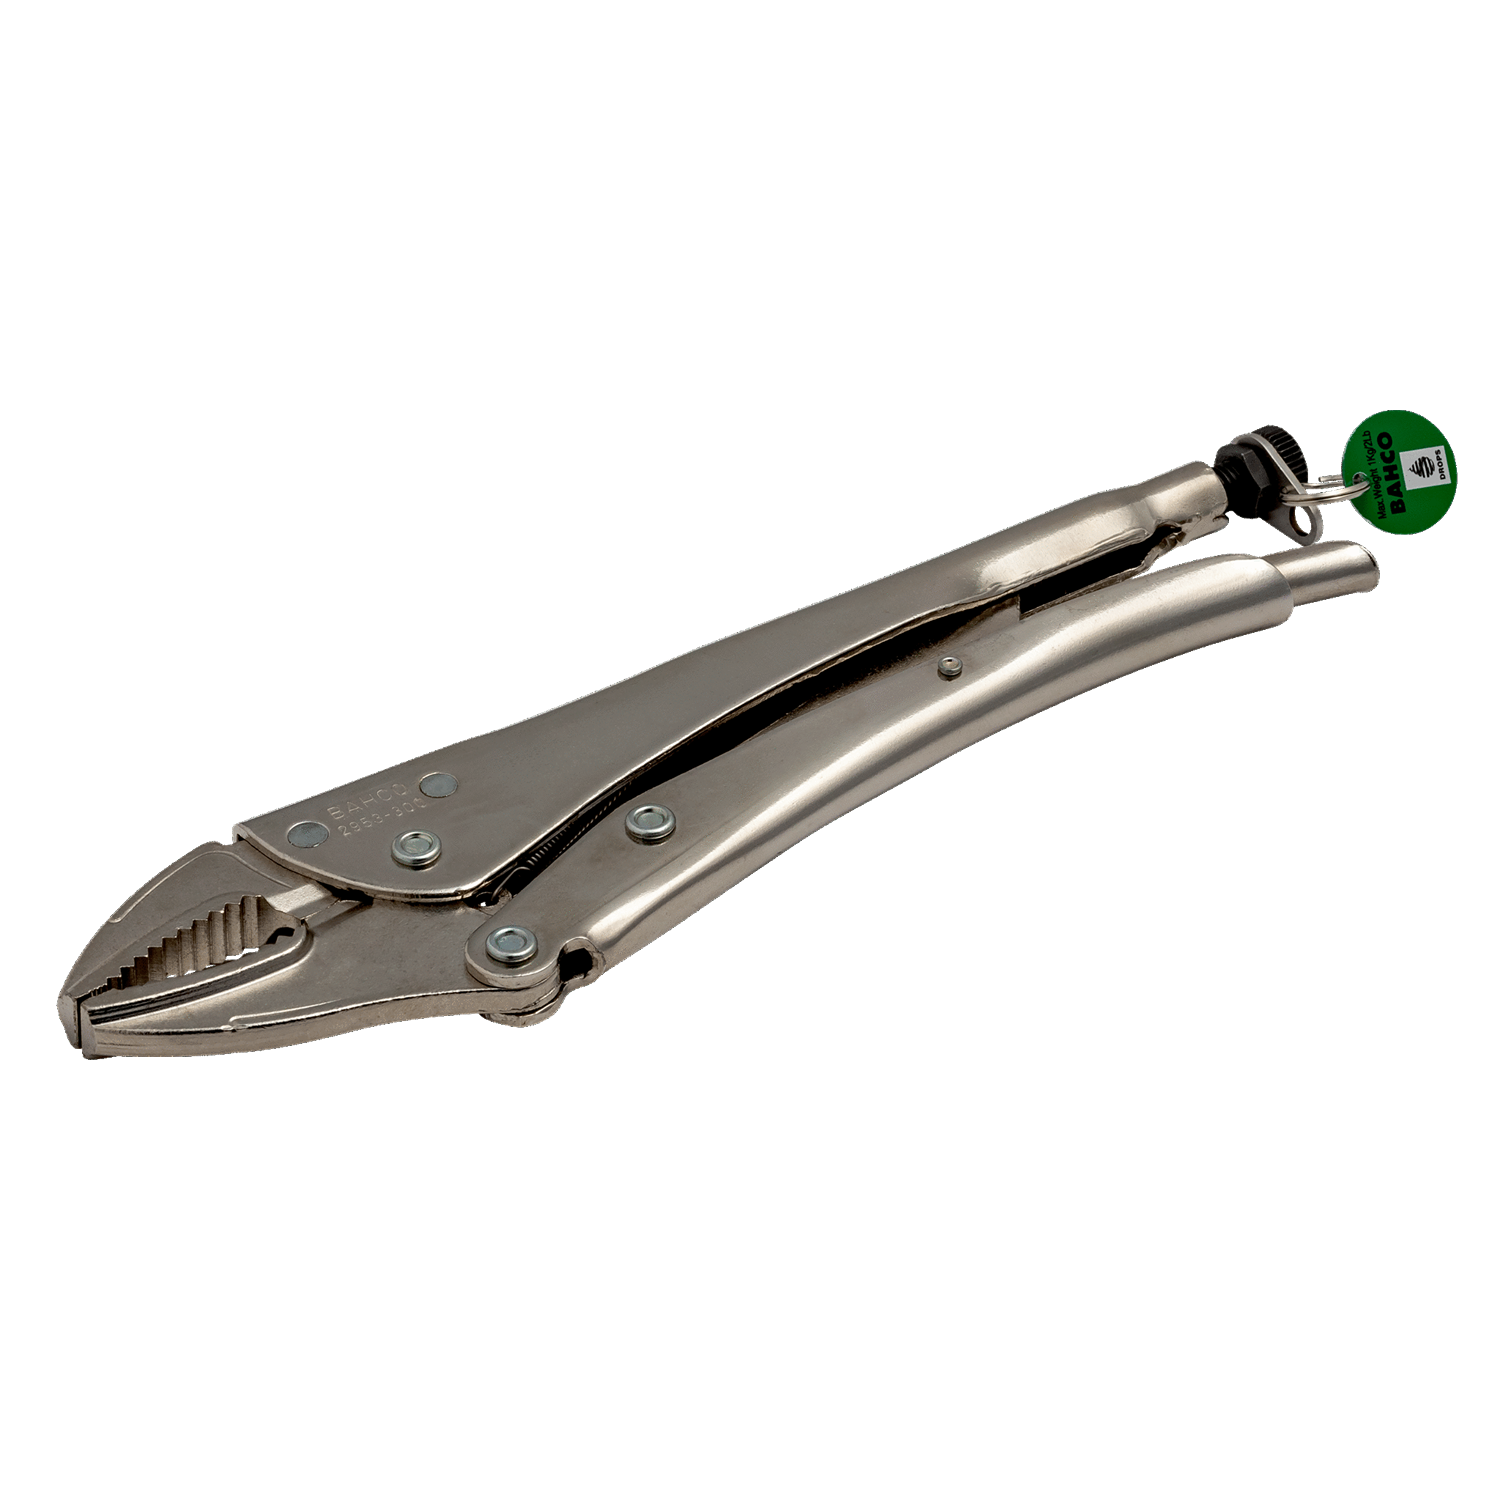 BAHCO TAH2953 Self Grip Locking Pliers with Curved Jaws - Premium Locking Pliers from BAHCO - Shop now at Yew Aik.